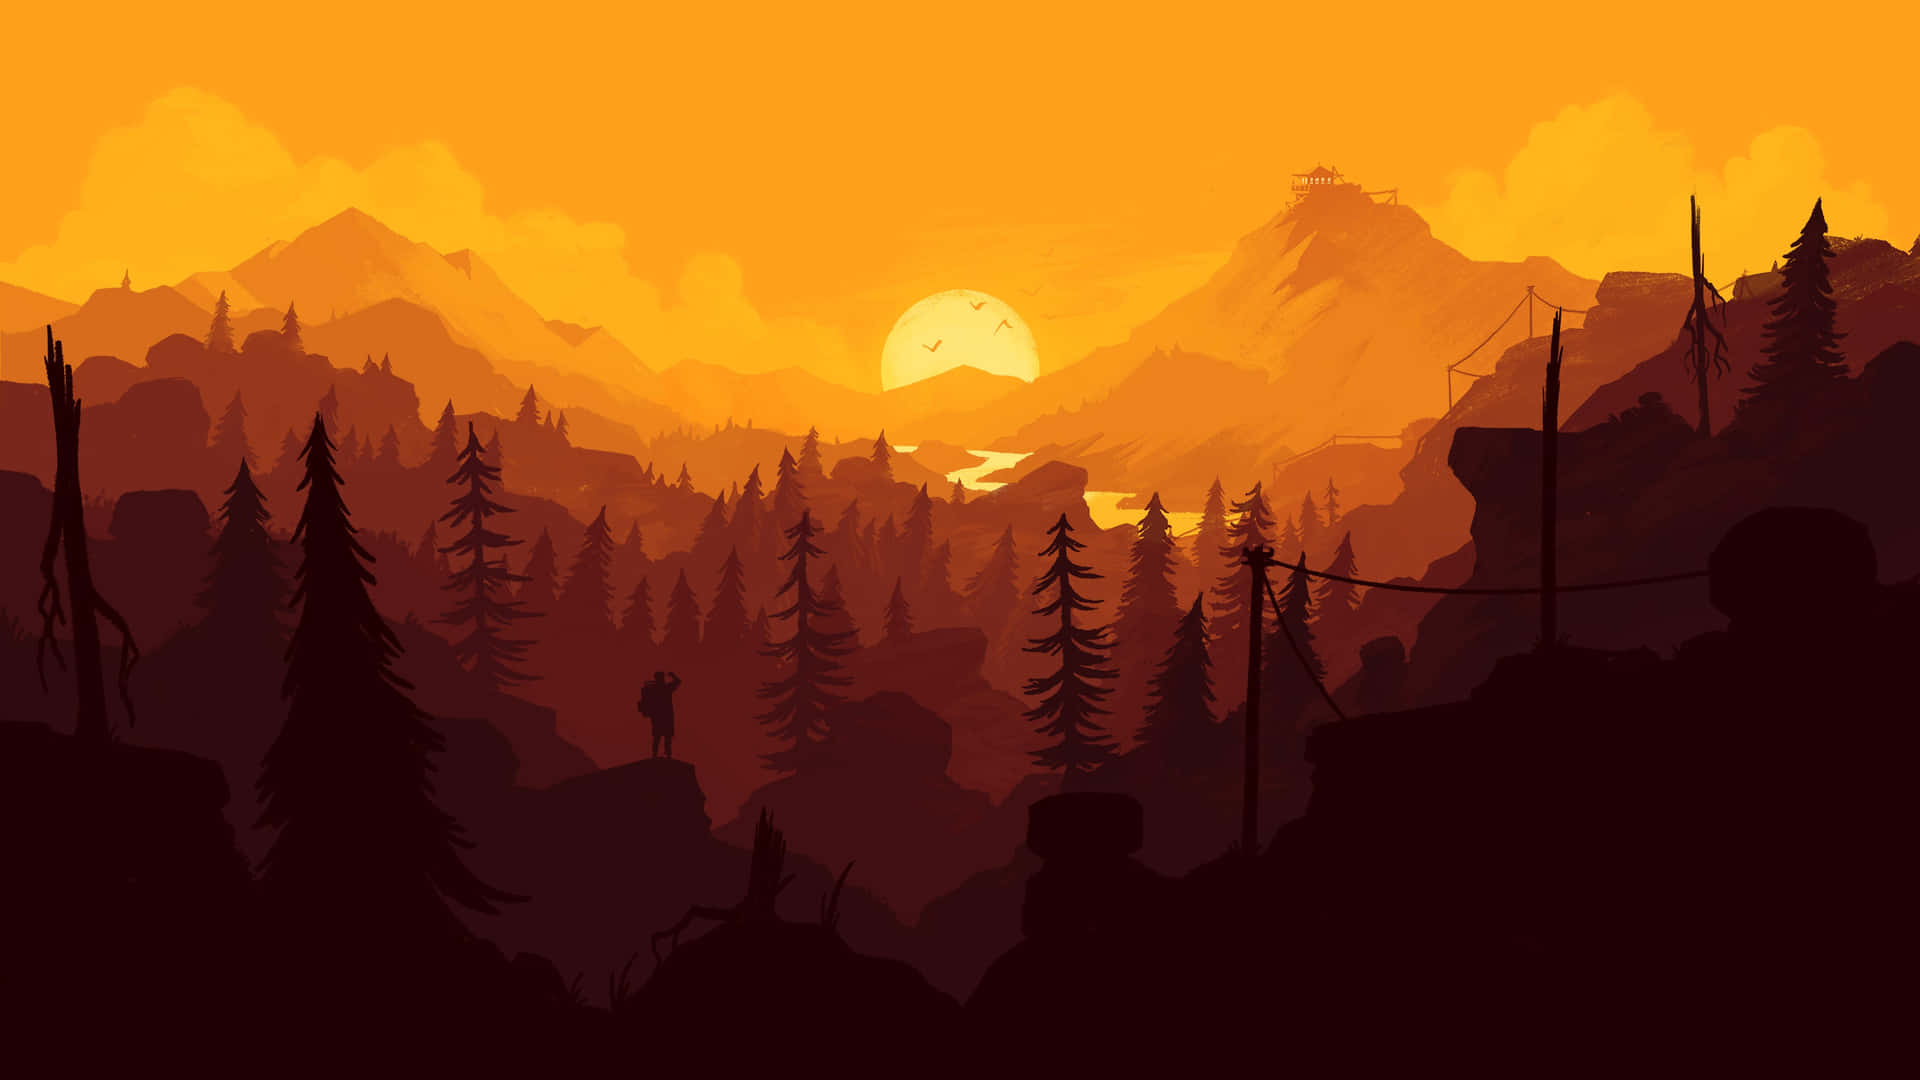 A Silhouette Of A Mountain With Trees And Sunset